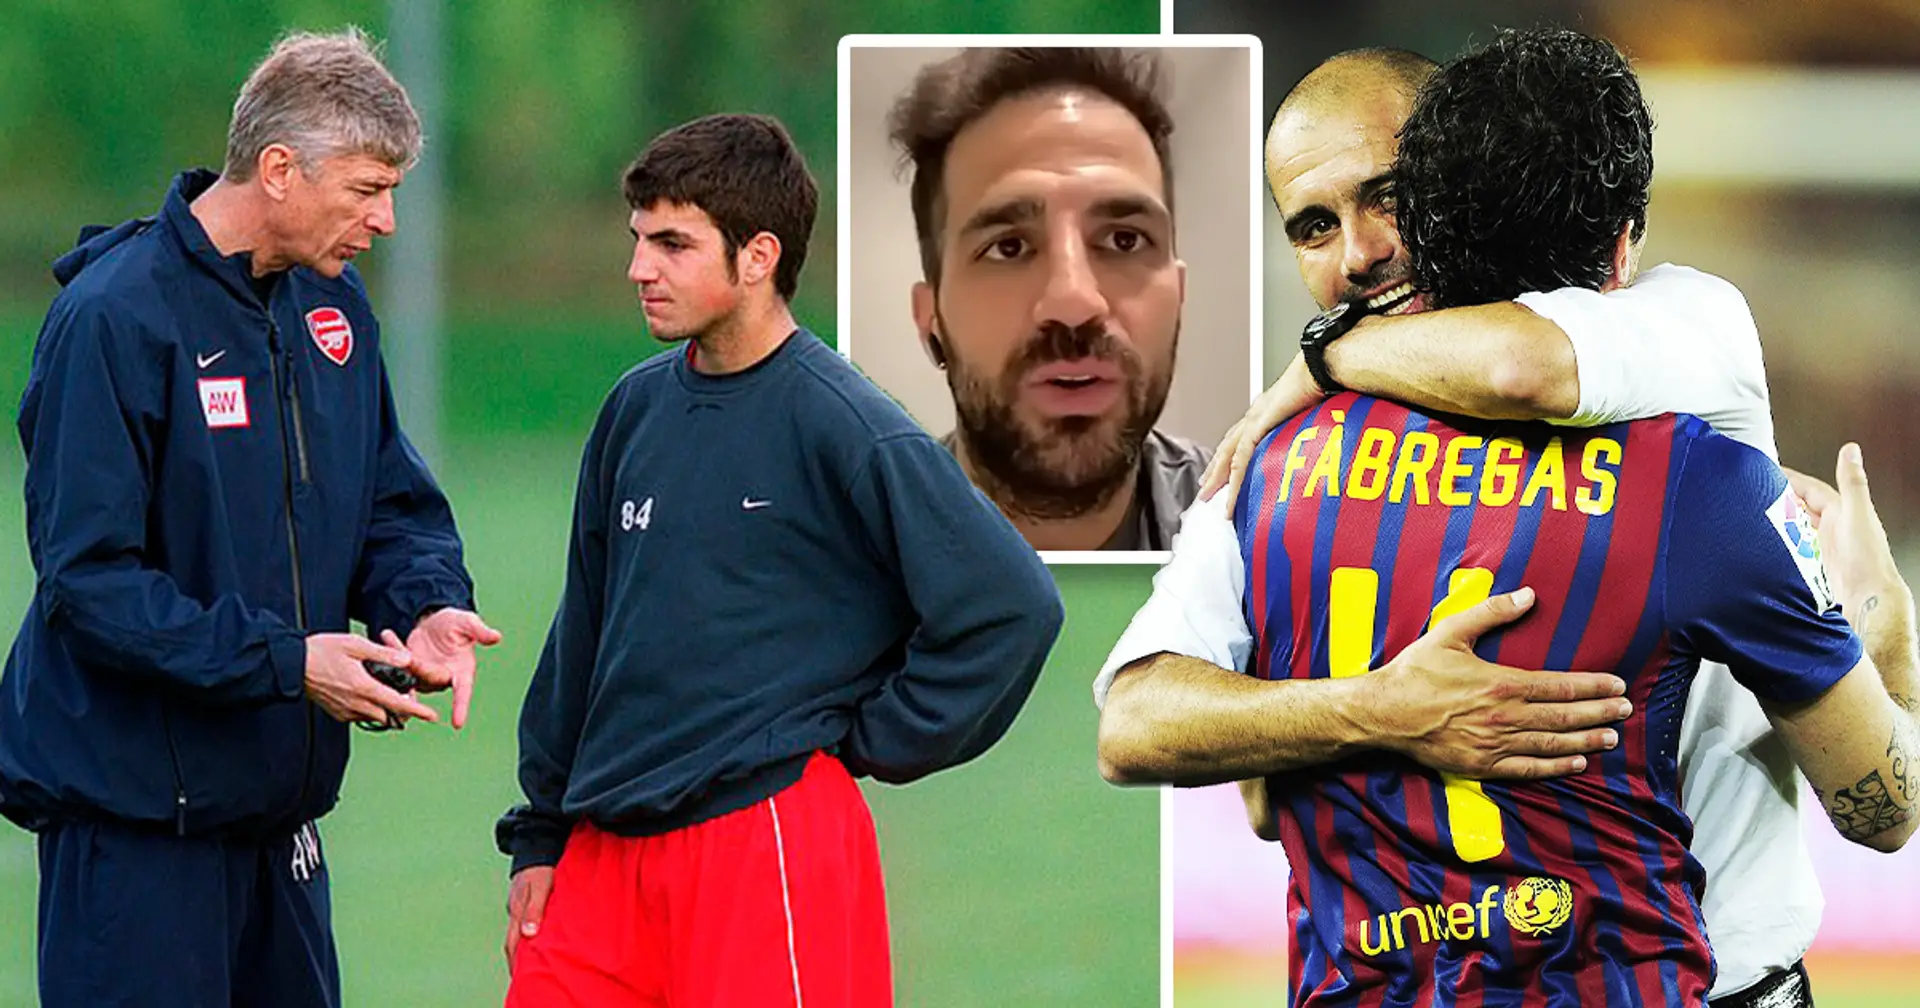 'He was a little bit hurt': Cecs Fabregas explains why Arsene Wenger didn't re-sign him when Barcelona offered him to Arsenal